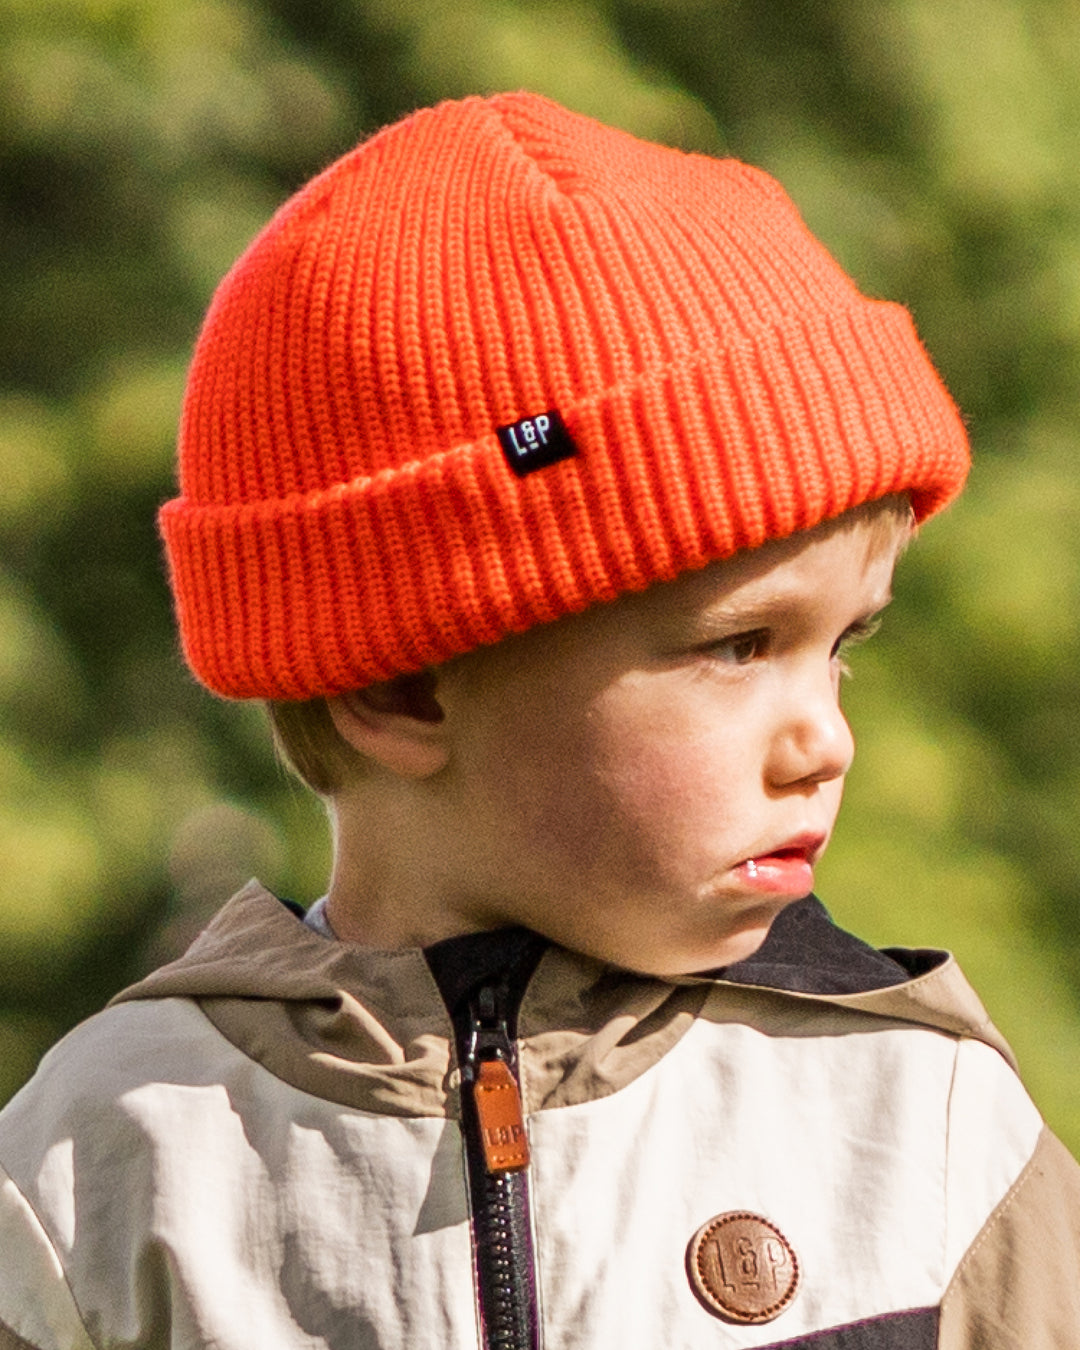 22 ENFANTS TUQUES | YOUTH TOQUES & BEANIES